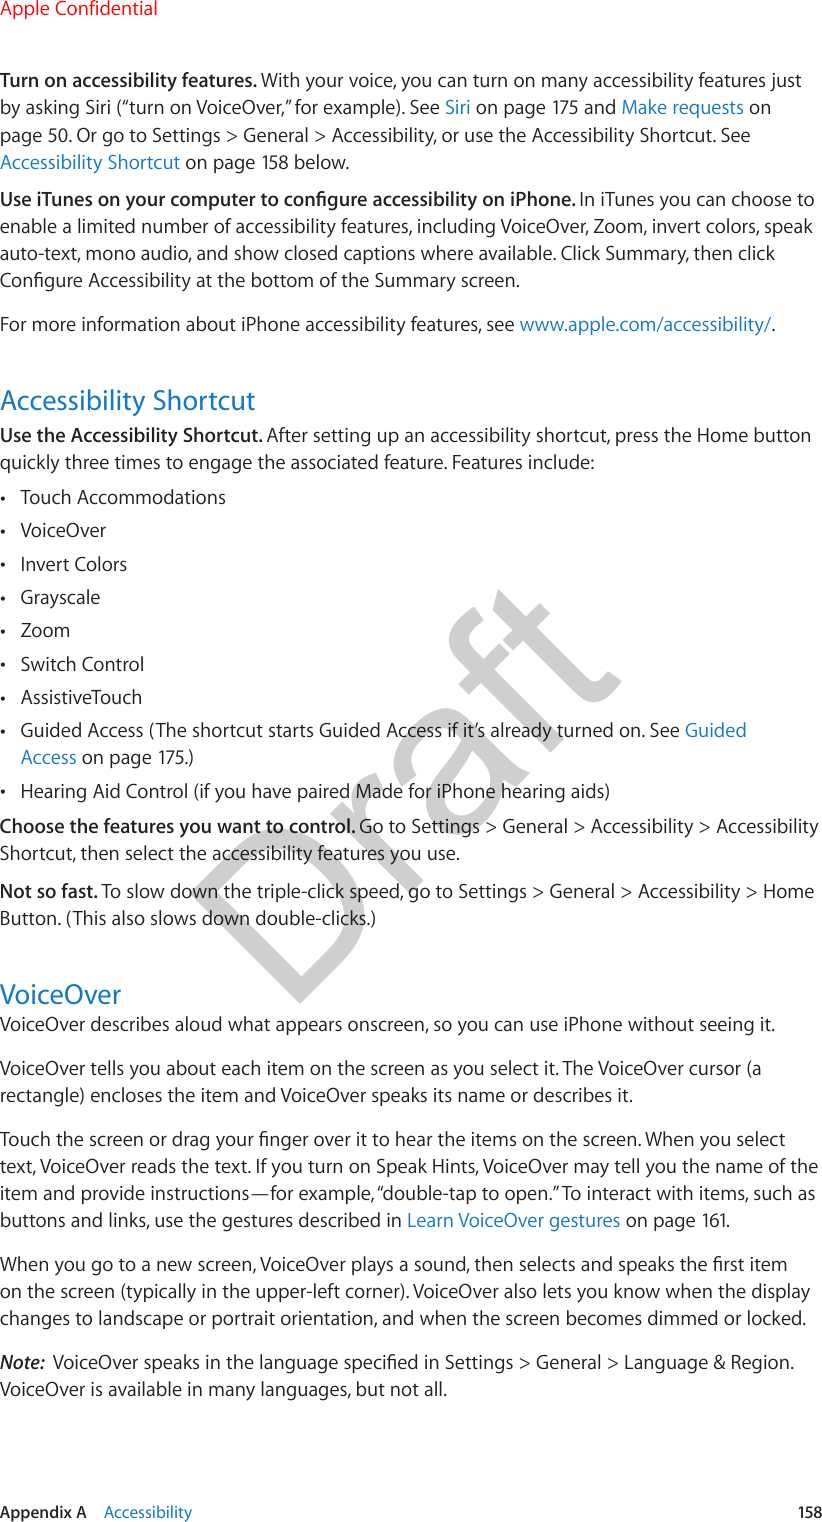 Appendix A    Accessibility  158Turn on accessibility features. With your voice, you can turn on many accessibility features just by asking Siri (“turn on VoiceOver,” for example). See Siri on page 175 and Make requests on page 50. Or go to Settings &gt; General &gt; Accessibility, or use the Accessibility Shortcut. See Accessibility Shortcut on page 158 below.Use iTunes on your computer to congure accessibility on iPhone. In iTunes you can choose to enable a limited number of accessibility features, including VoiceOver, Zoom, invert colors, speak auto-text, mono audio, and show closed captions where available. Click Summary, then click Congure Accessibility at the bottom of the Summary screen.For more information about iPhone accessibility features, see www.apple.com/accessibility/.Accessibility ShortcutUse the Accessibility Shortcut. After setting up an accessibility shortcut, press the Home button quickly three times to engage the associated feature. Features include: •Touch Accommodations •VoiceOver •Invert Colors •Grayscale •Zoom •Switch Control •AssistiveTouch •Guided Access (The shortcut starts Guided Access if it’s already turned on. See GuidedAccess on page 175.) •Hearing Aid Control (if you have paired Made for iPhone hearing aids)Choose the features you want to control. Go to Settings &gt; General &gt; Accessibility &gt; Accessibility Shortcut, then select the accessibility features you use.Not so fast. To slow down the triple-click speed, go to Settings &gt; General &gt; Accessibility &gt; Home Button. (This also slows down double-clicks.)VoiceOverVoiceOver describes aloud what appears onscreen, so you can use iPhone without seeing it.VoiceOver tells you about each item on the screen as you select it. The VoiceOver cursor (a rectangle) encloses the item and VoiceOver speaks its name or describes it.Touch the screen or drag your nger over it to hear the items on the screen. When you select text, VoiceOver reads the text. If you turn on Speak Hints, VoiceOver may tell you the name of the item and provide instructions—for example, “double-tap to open.” To interact with items, such as buttons and links, use the gestures described in Learn VoiceOver gestures on page 161.When you go to a new screen, VoiceOver plays a sound, then selects and speaks the rst item on the screen (typically in the upper-left corner). VoiceOver also lets you know when the display changes to landscape or portrait orientation, and when the screen becomes dimmed or locked.Note:  VoiceOver speaks in the language specied in Settings &gt; General &gt; Language &amp; Region. VoiceOver is available in many languages, but not all.Apple ConfidentialDraft